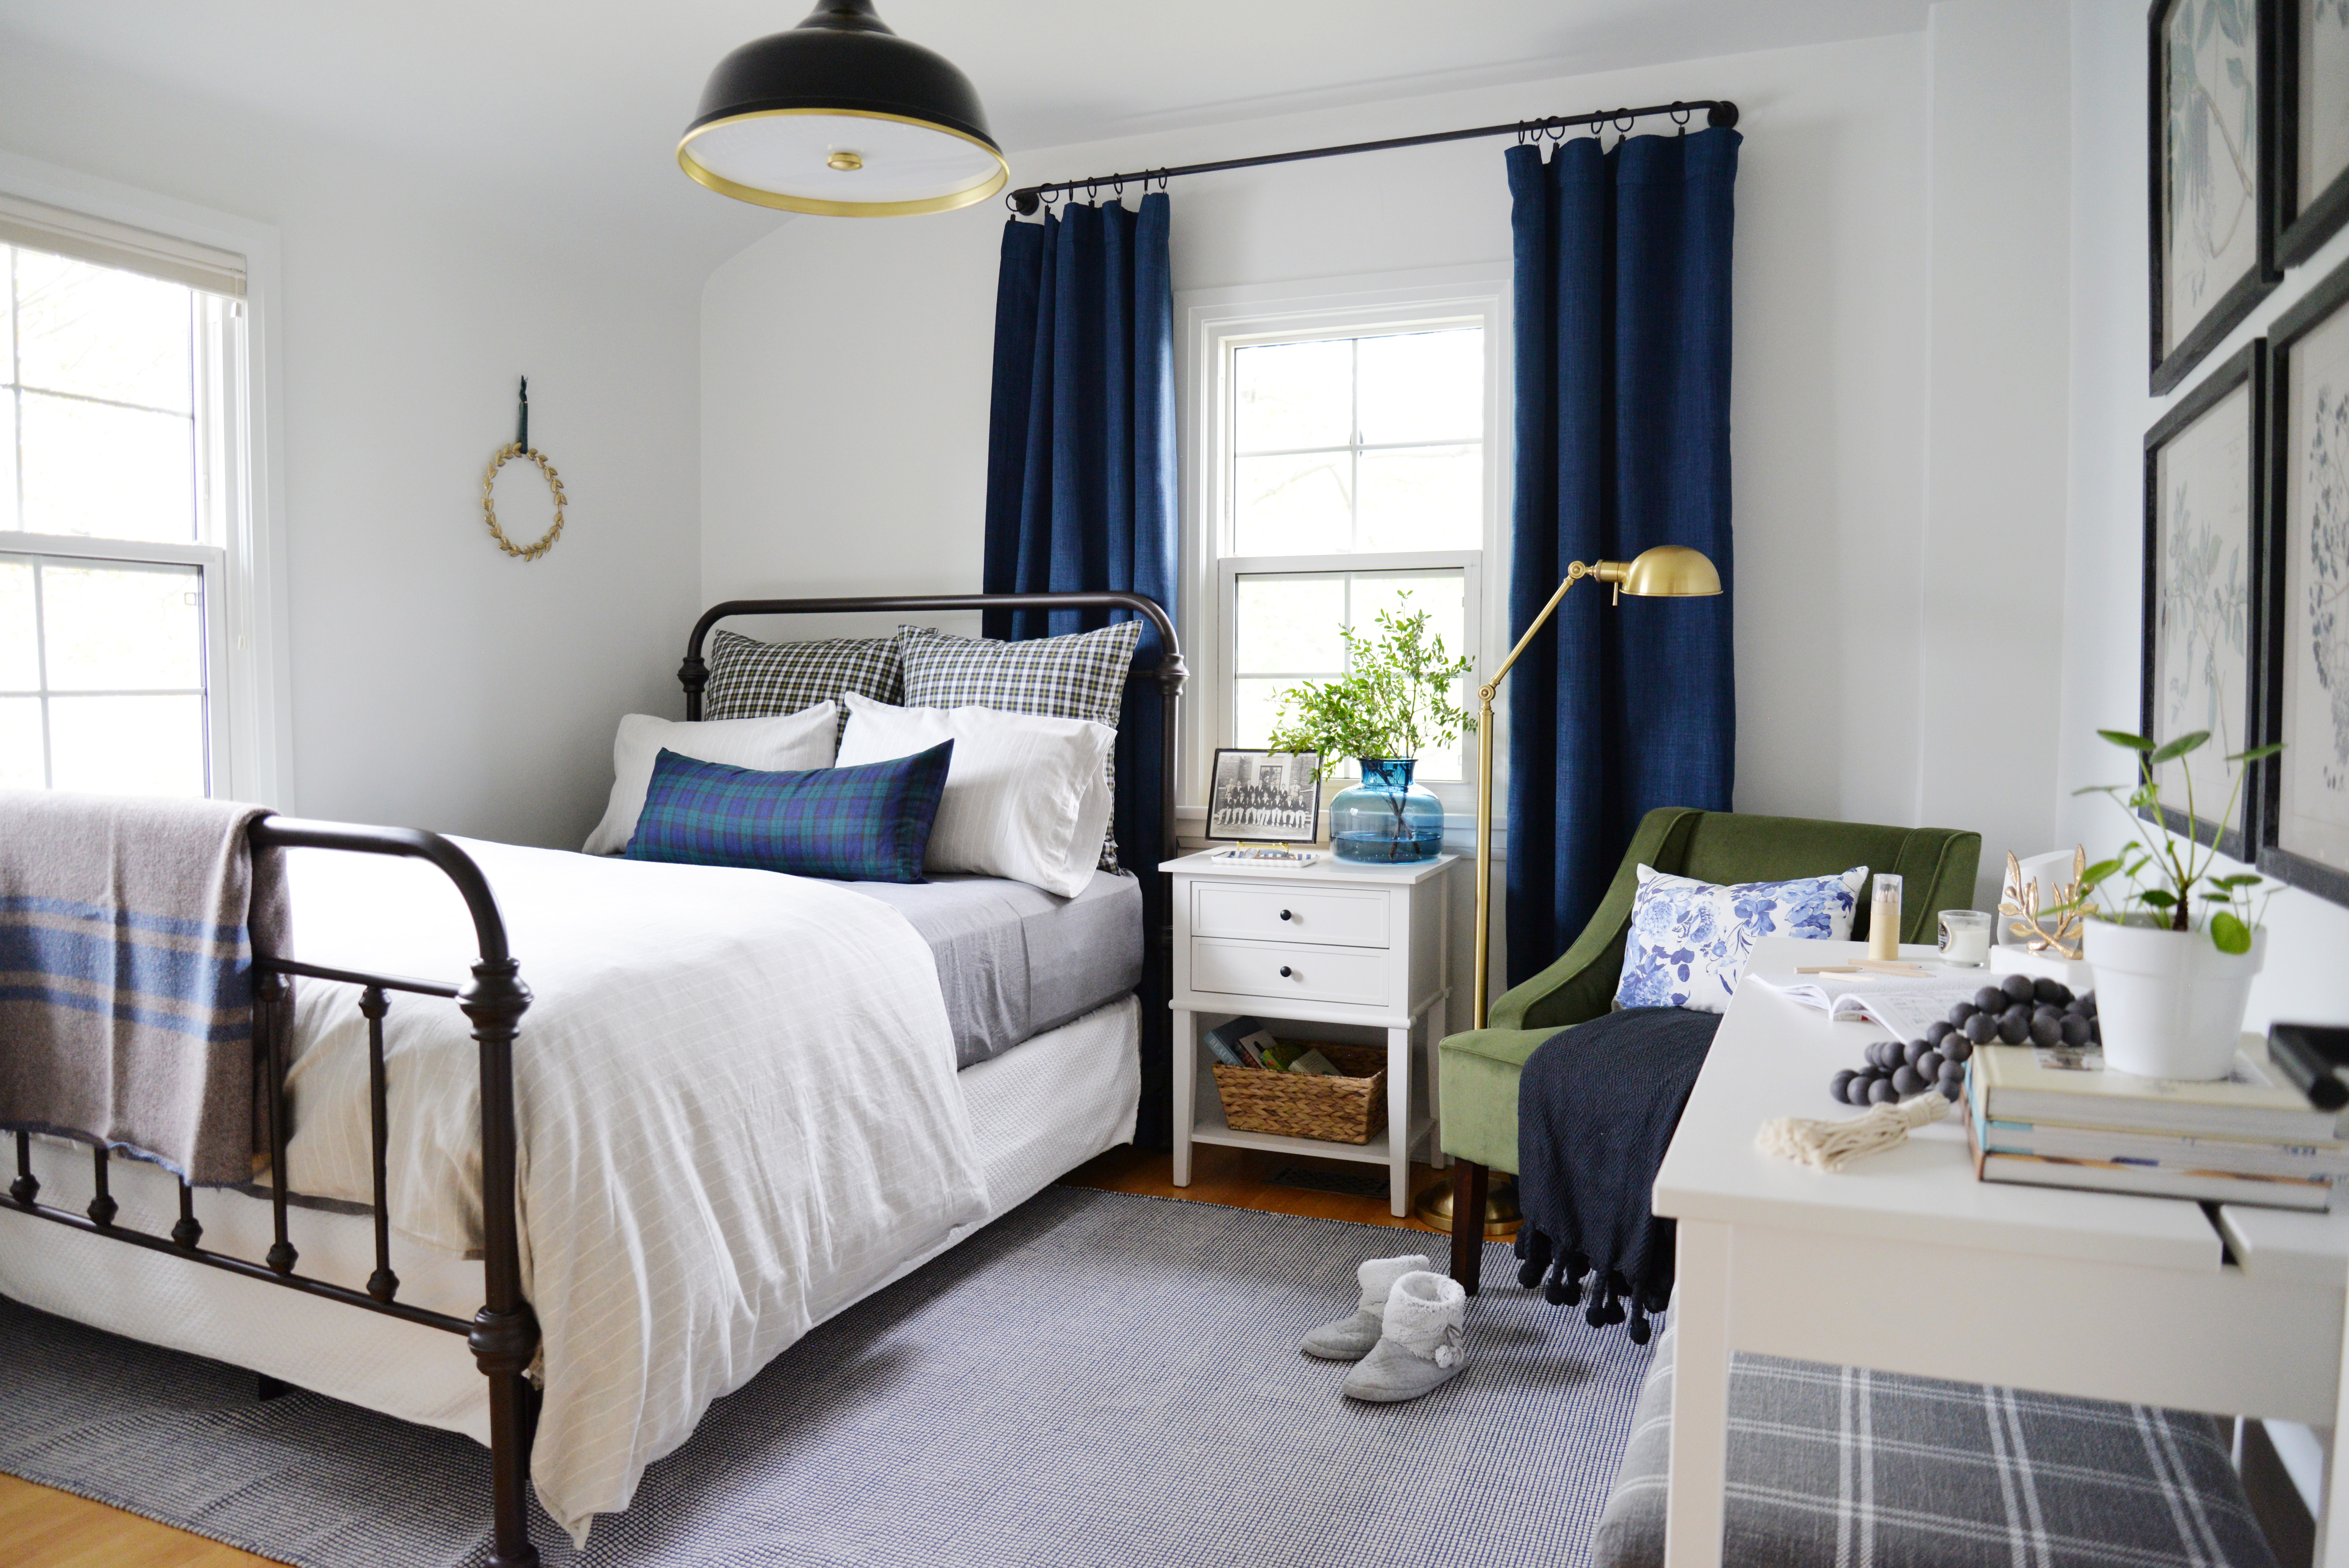 guest bedroom with metal bed, white walls, and navy blackout curtains